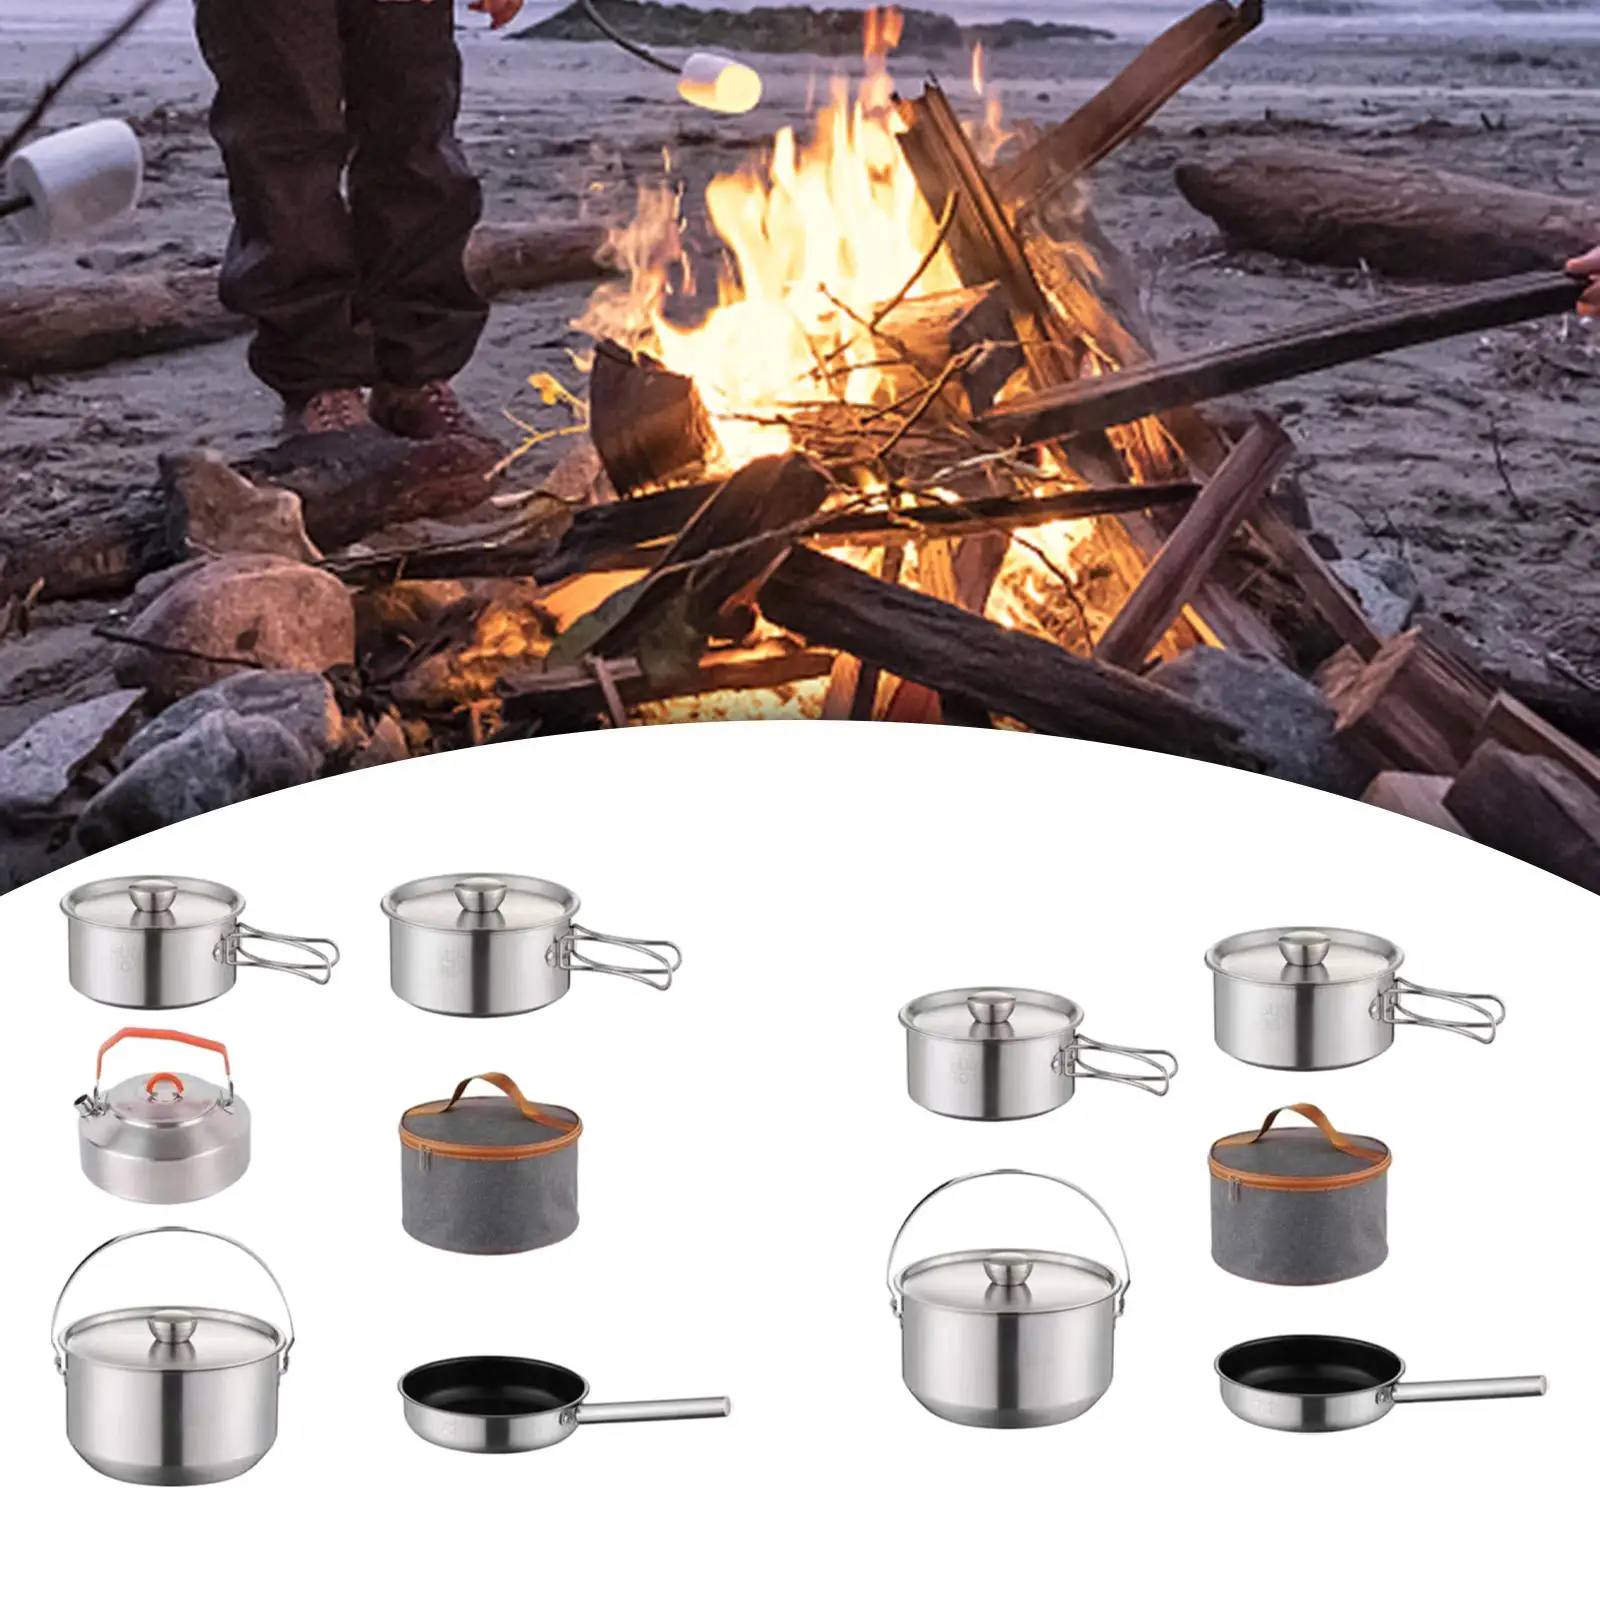 Camping Cookware Set Cooking Set with Storage Bag Tableware Cooking Set Outdoor